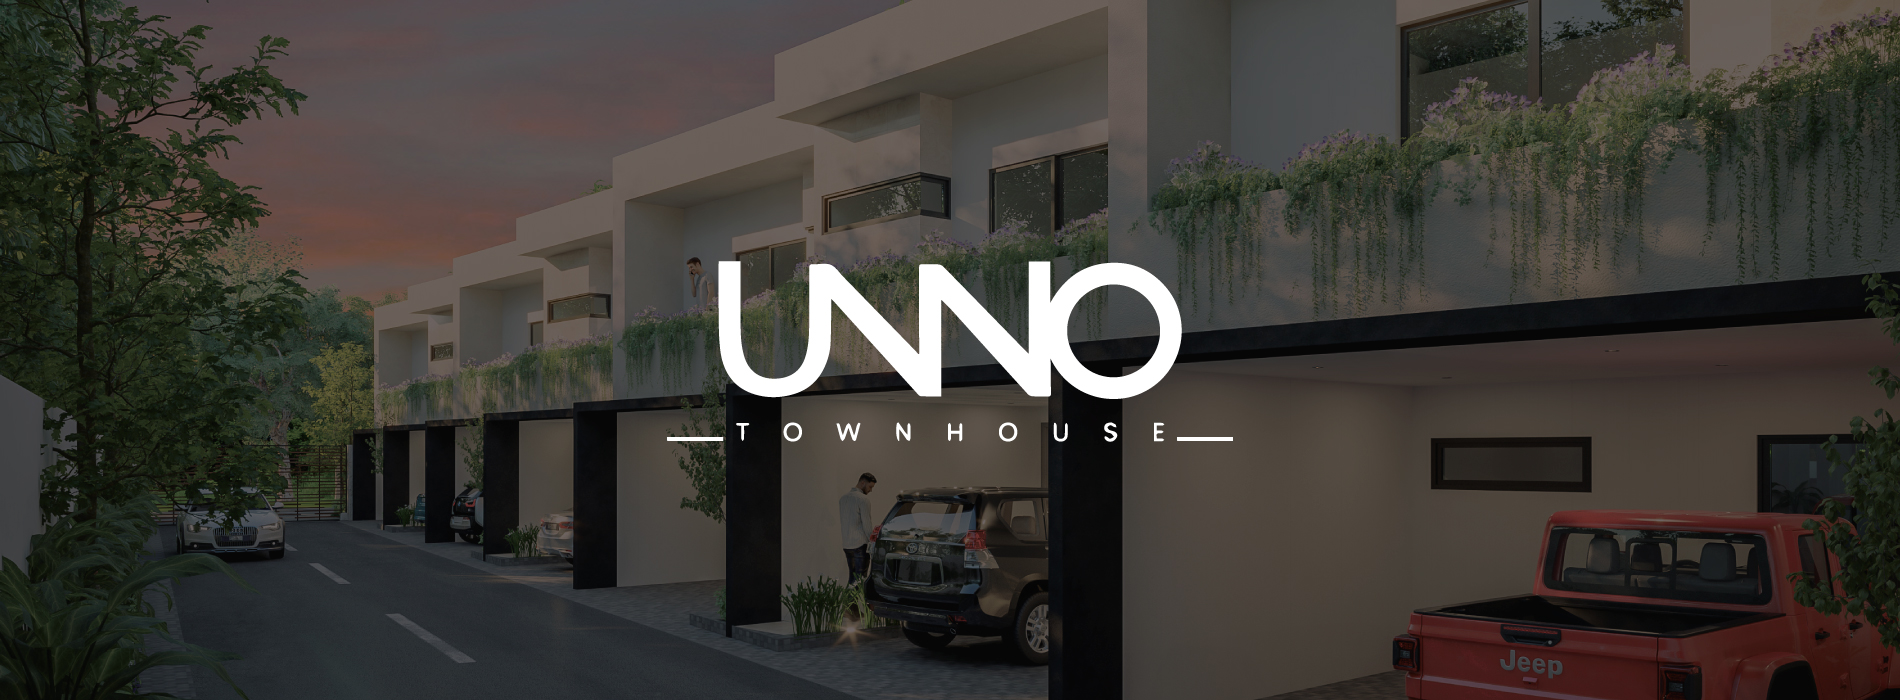 Unno Townhouse Goodlers